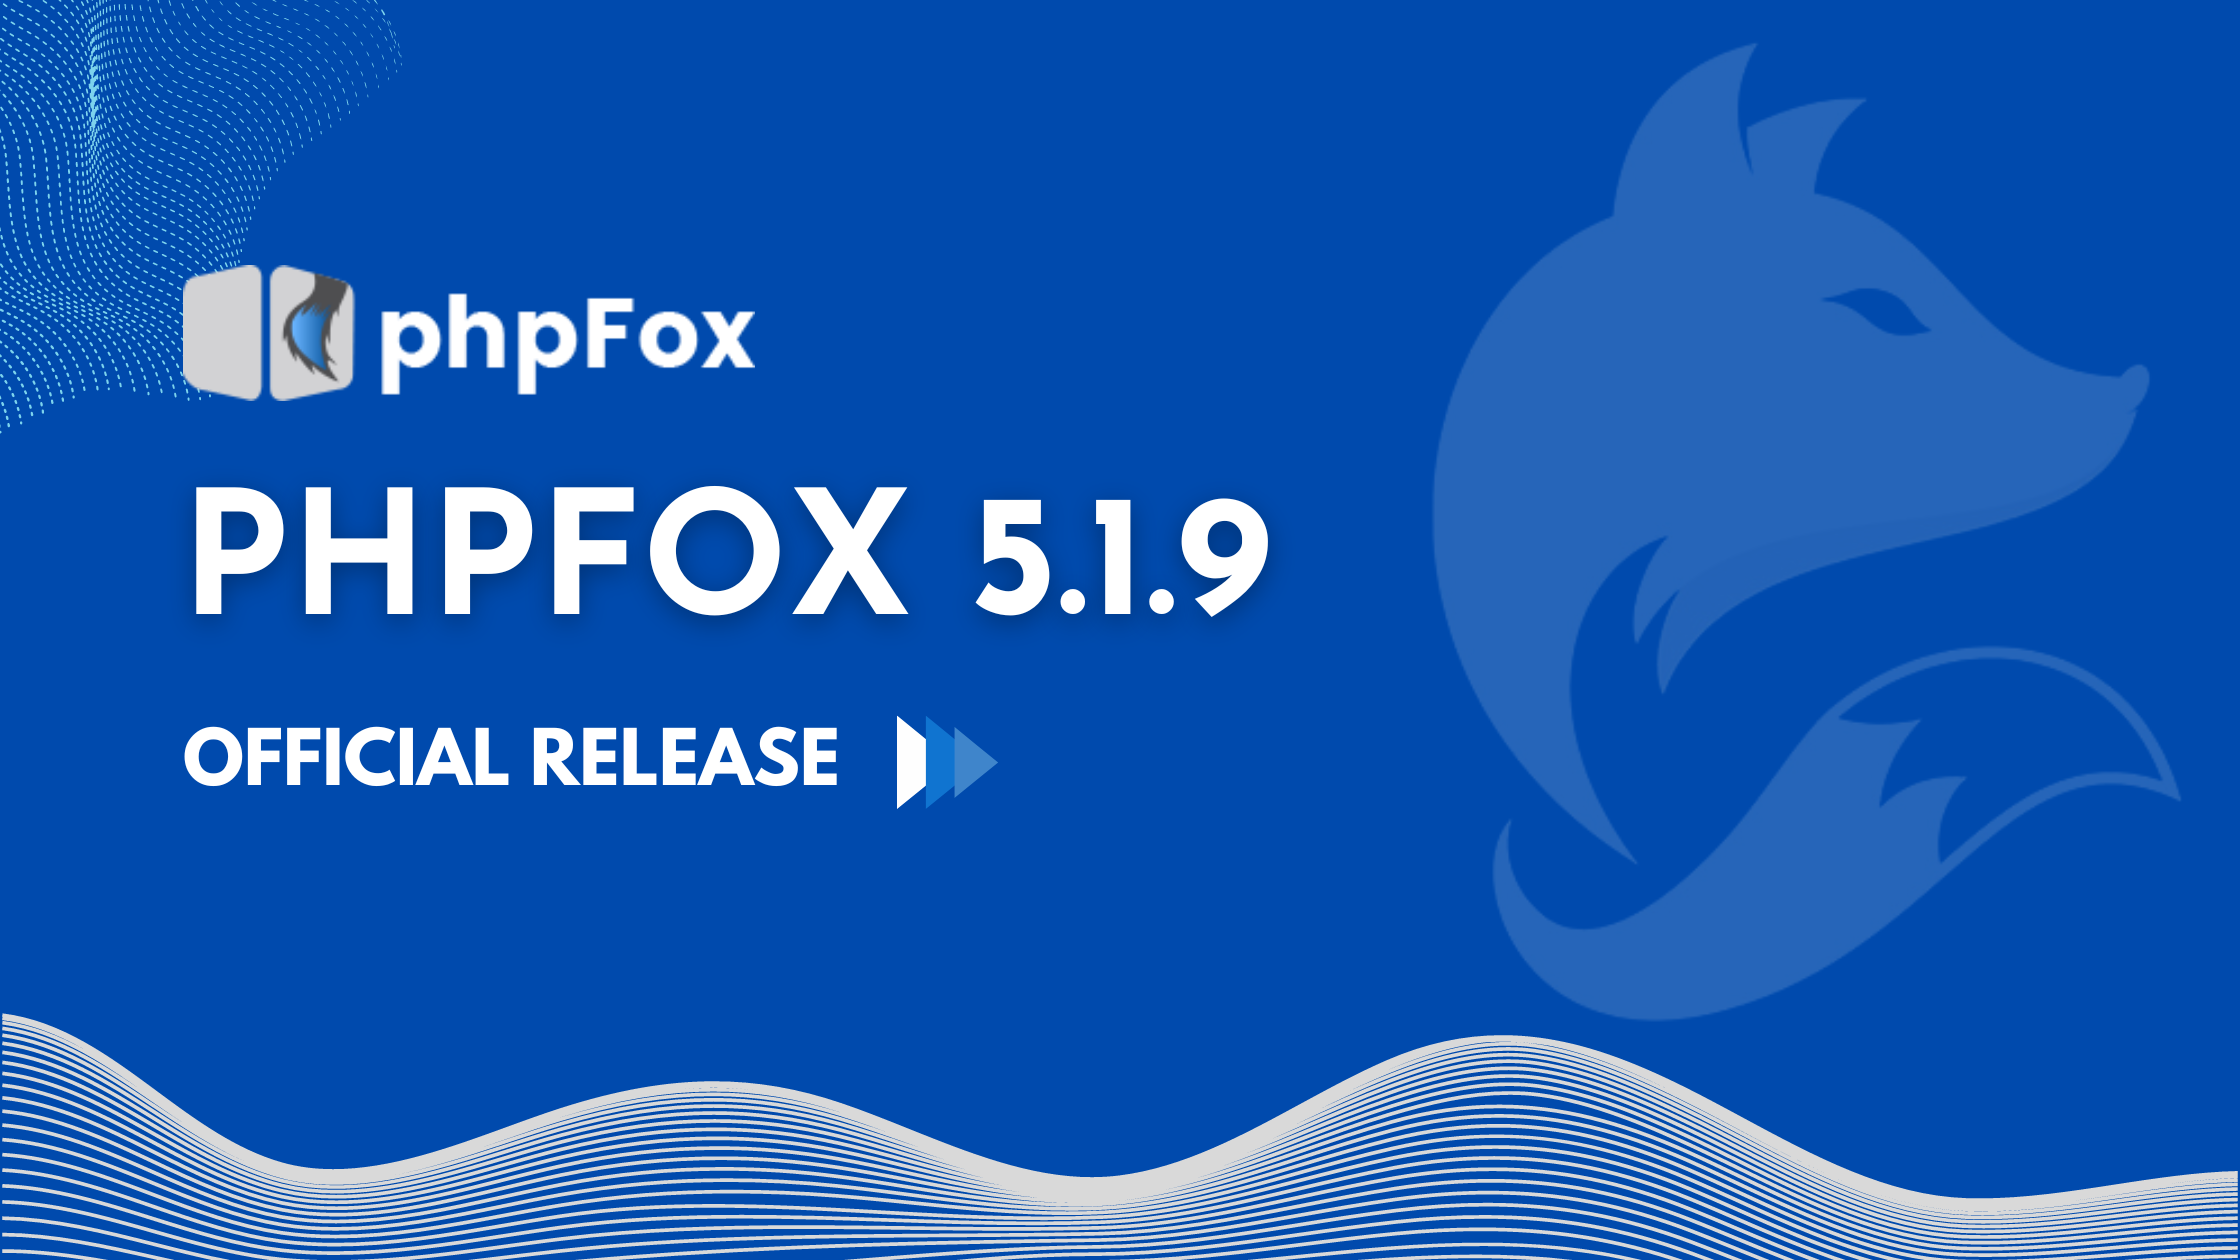 phpFox 5.1.9 Official Release